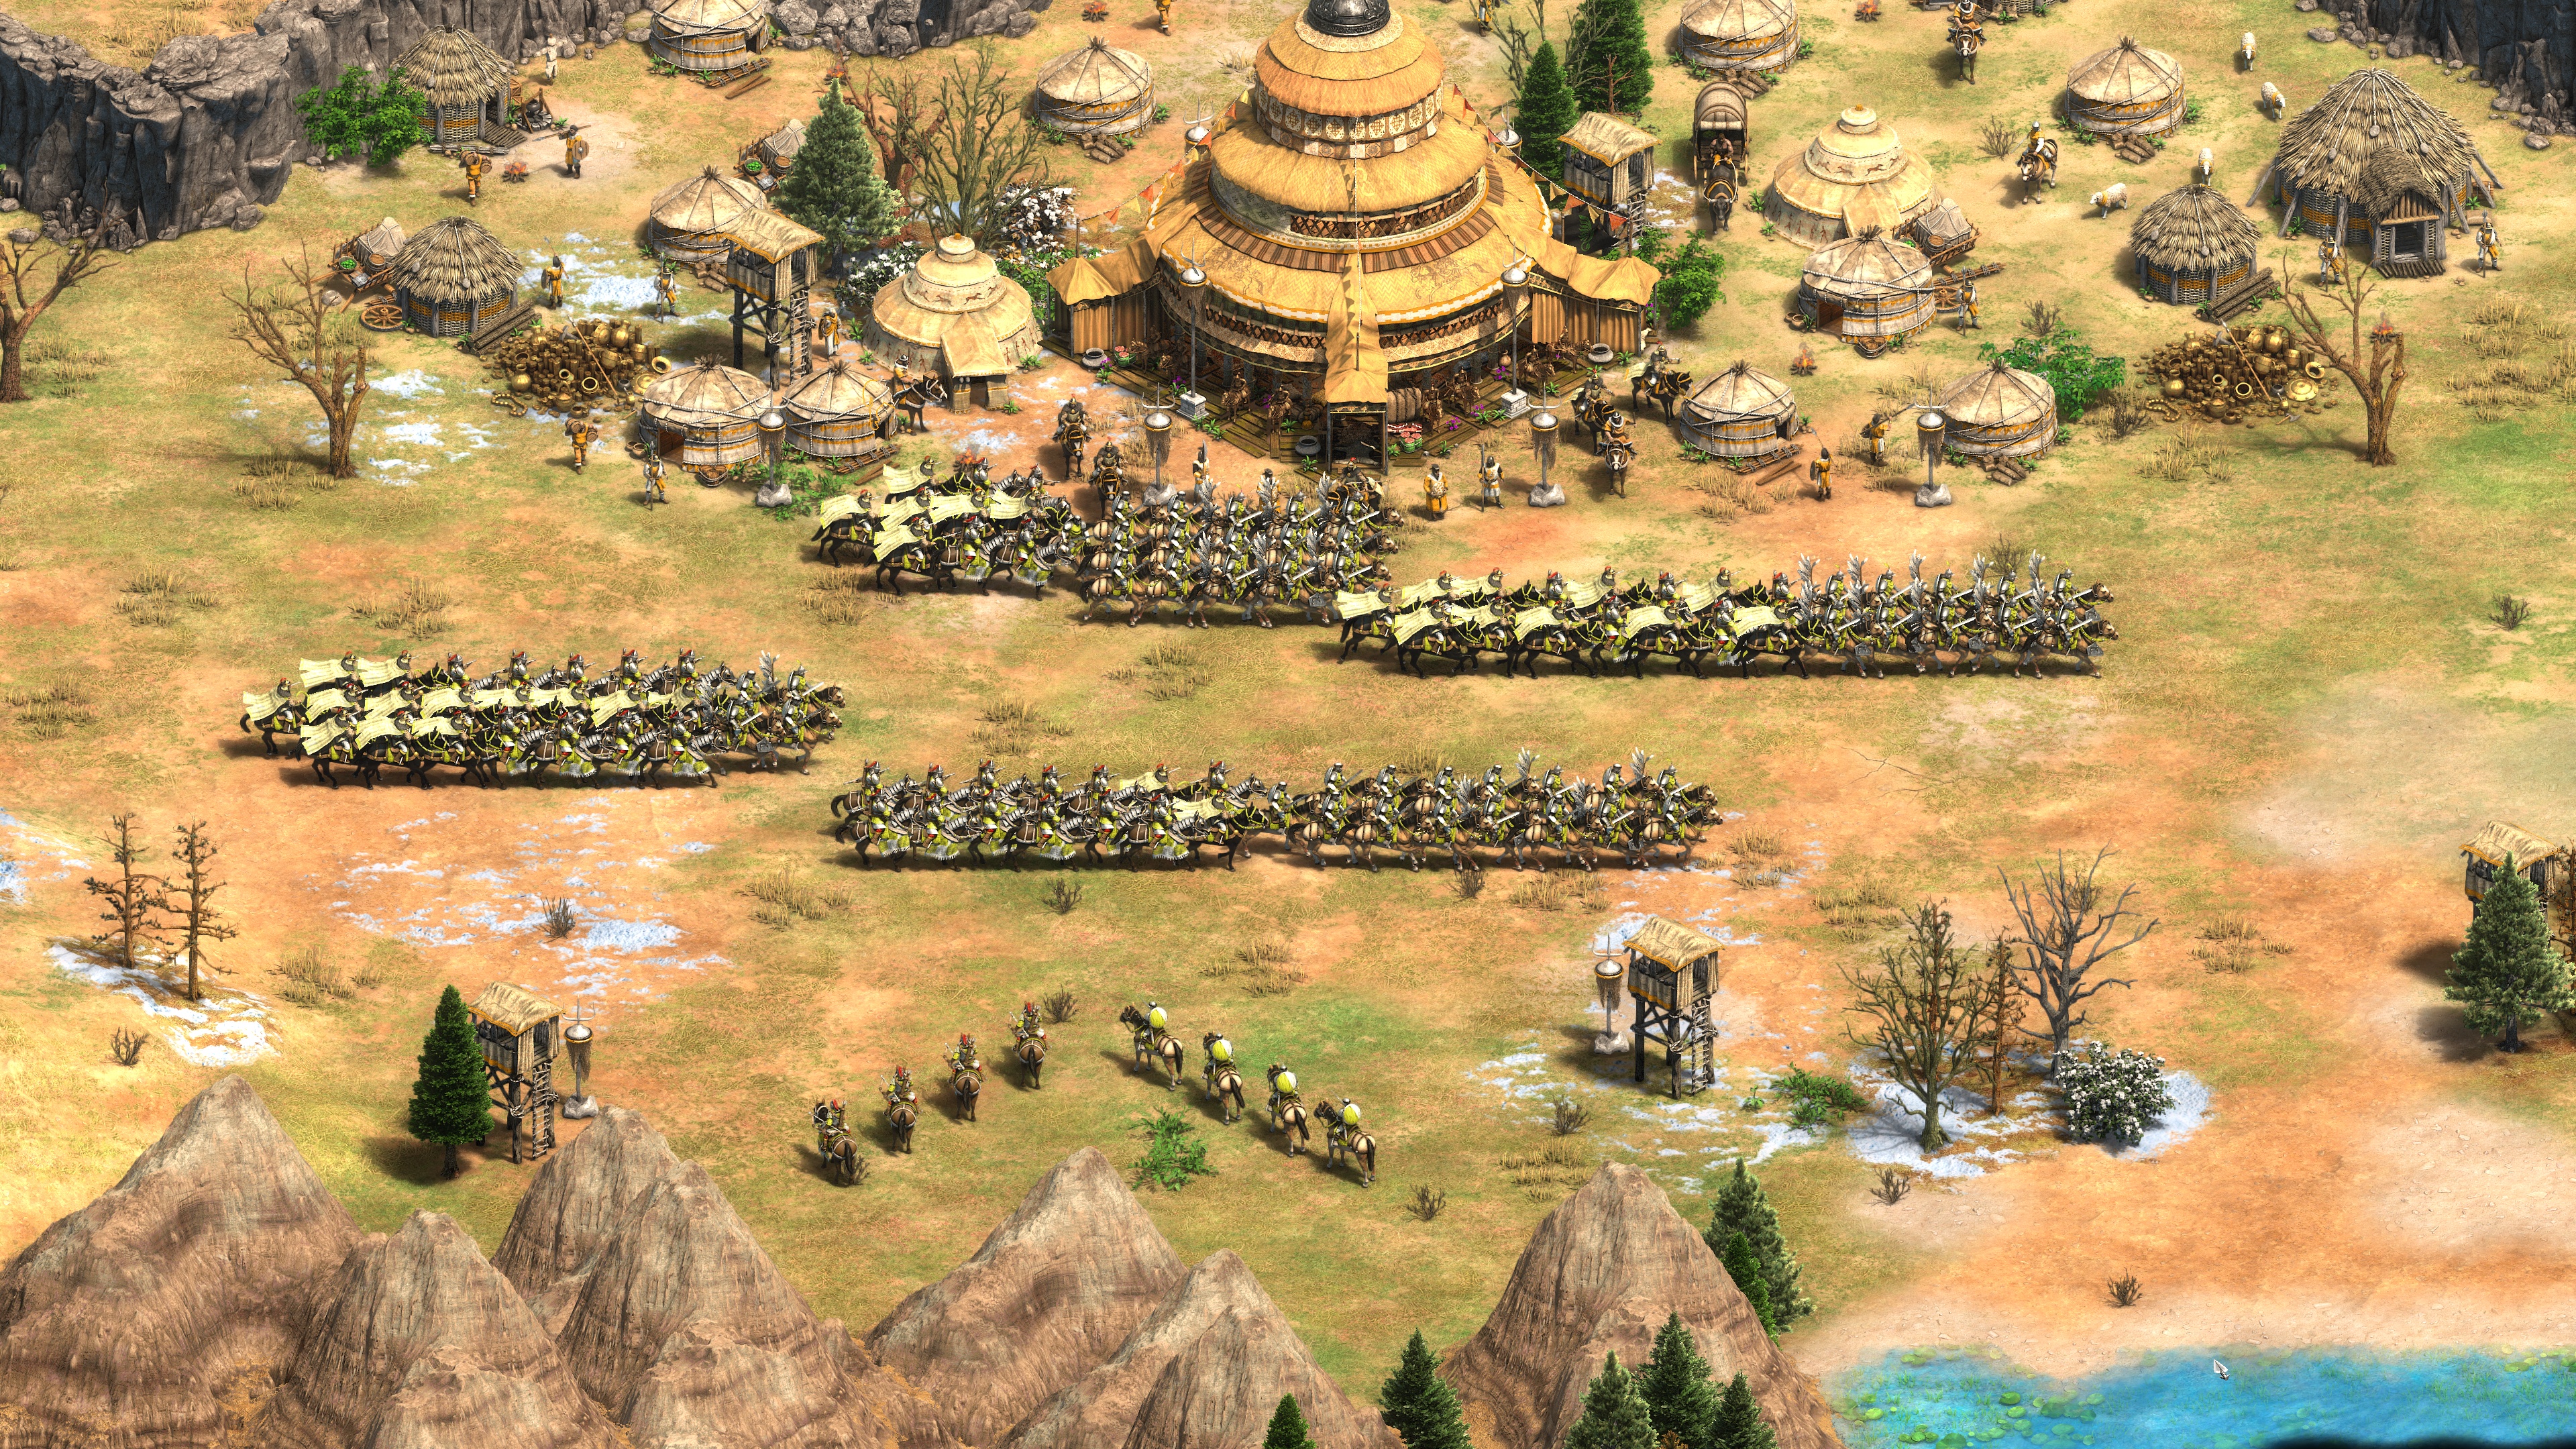 Age of Empires 2 Definitive Edition